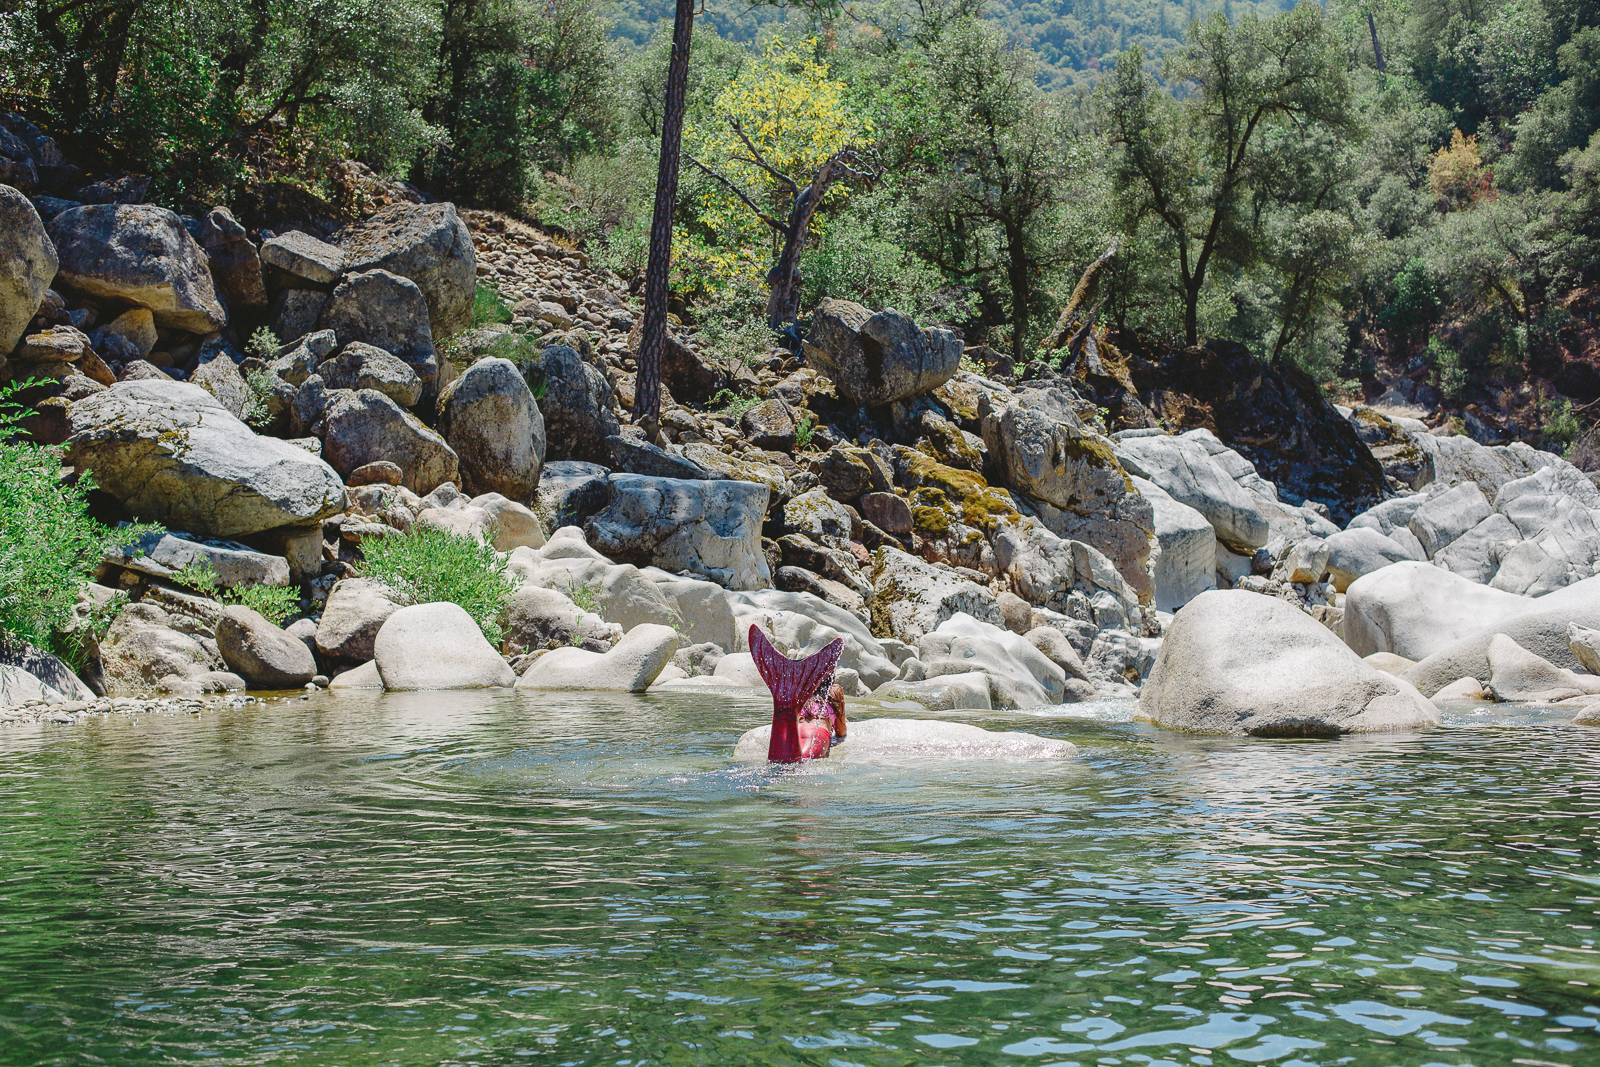 Mermaid sunning on the boulders at a mountain river